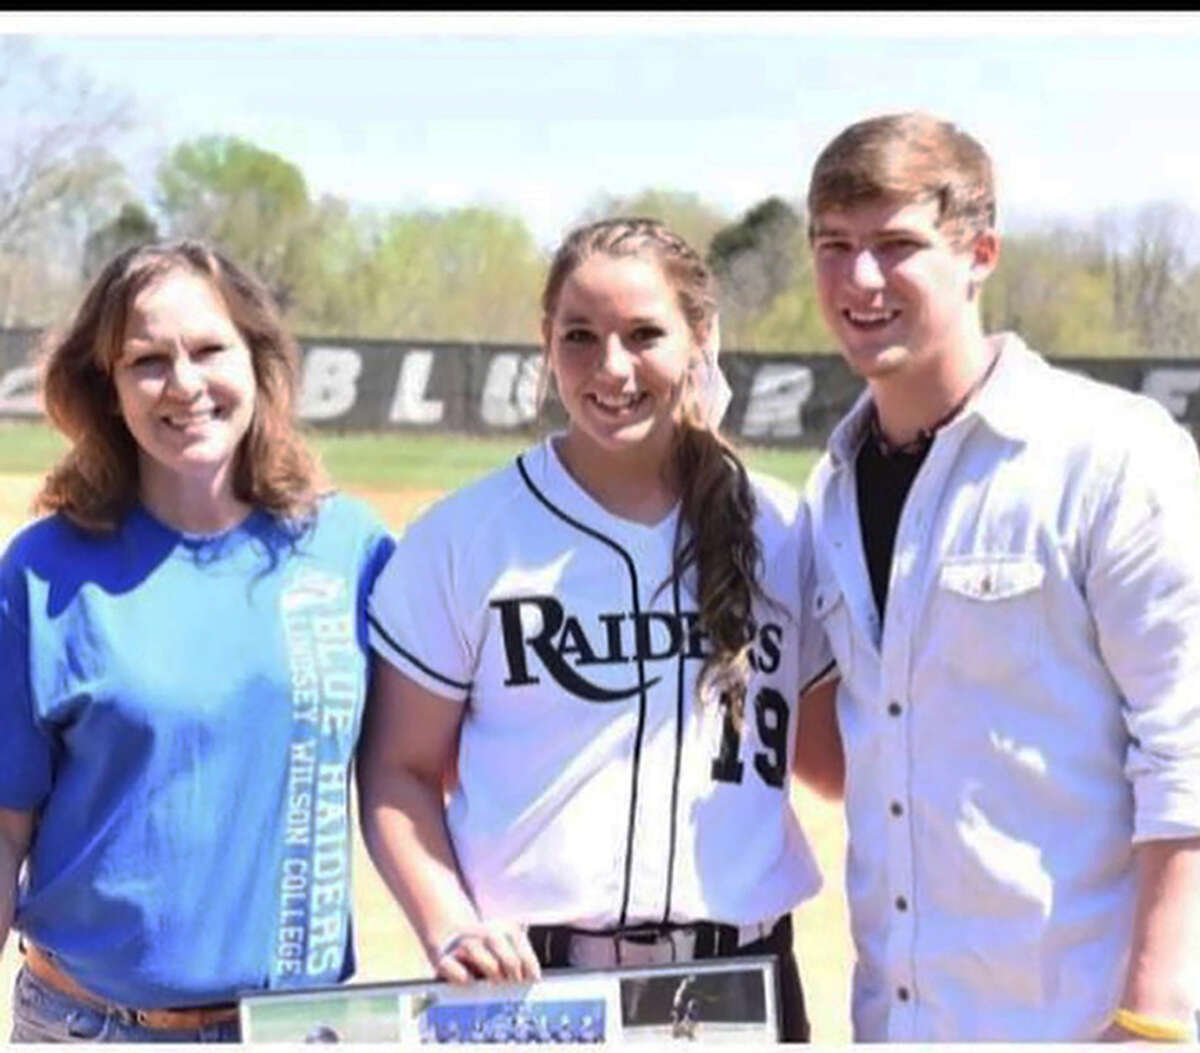 Metro-East graduate Amanda Trampe, middle, with her mother, Shari Meyer, and her brother, Jonathan Trampe, on Senior Day in 2015 at Lindsey Wilson College